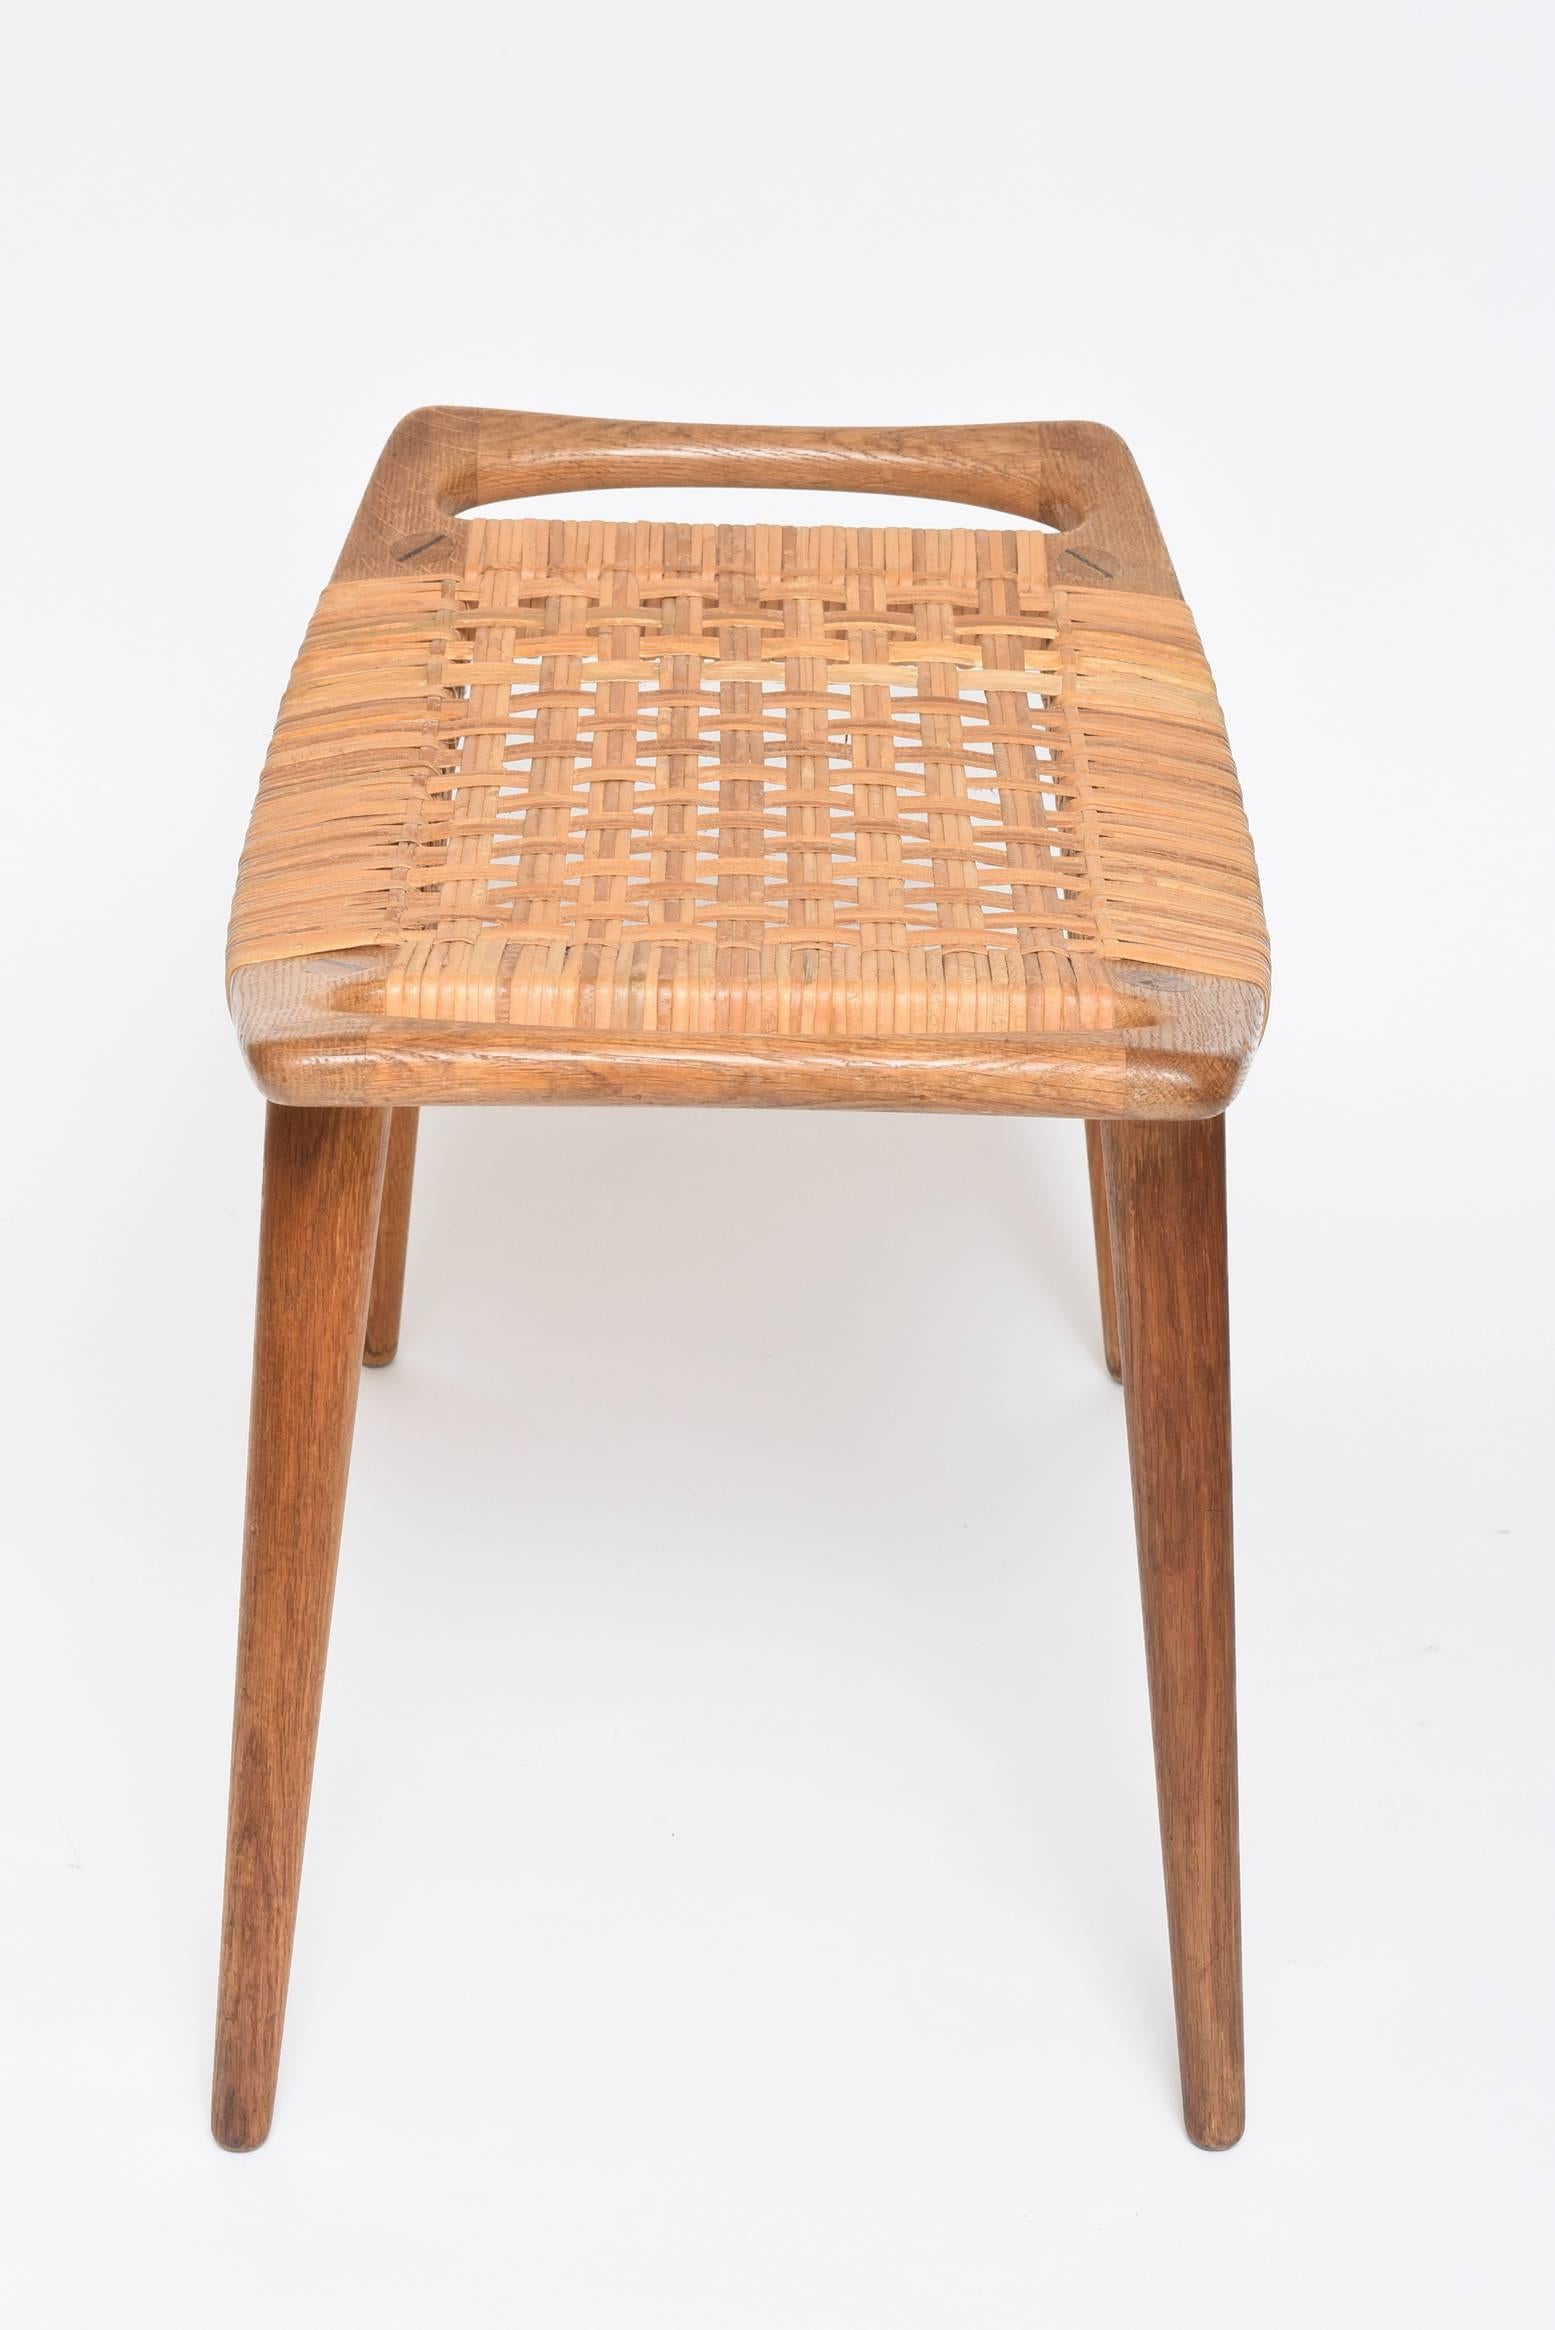 Mid-20th Century Hans Wegner Woven Cane Bench or Stool For Sale